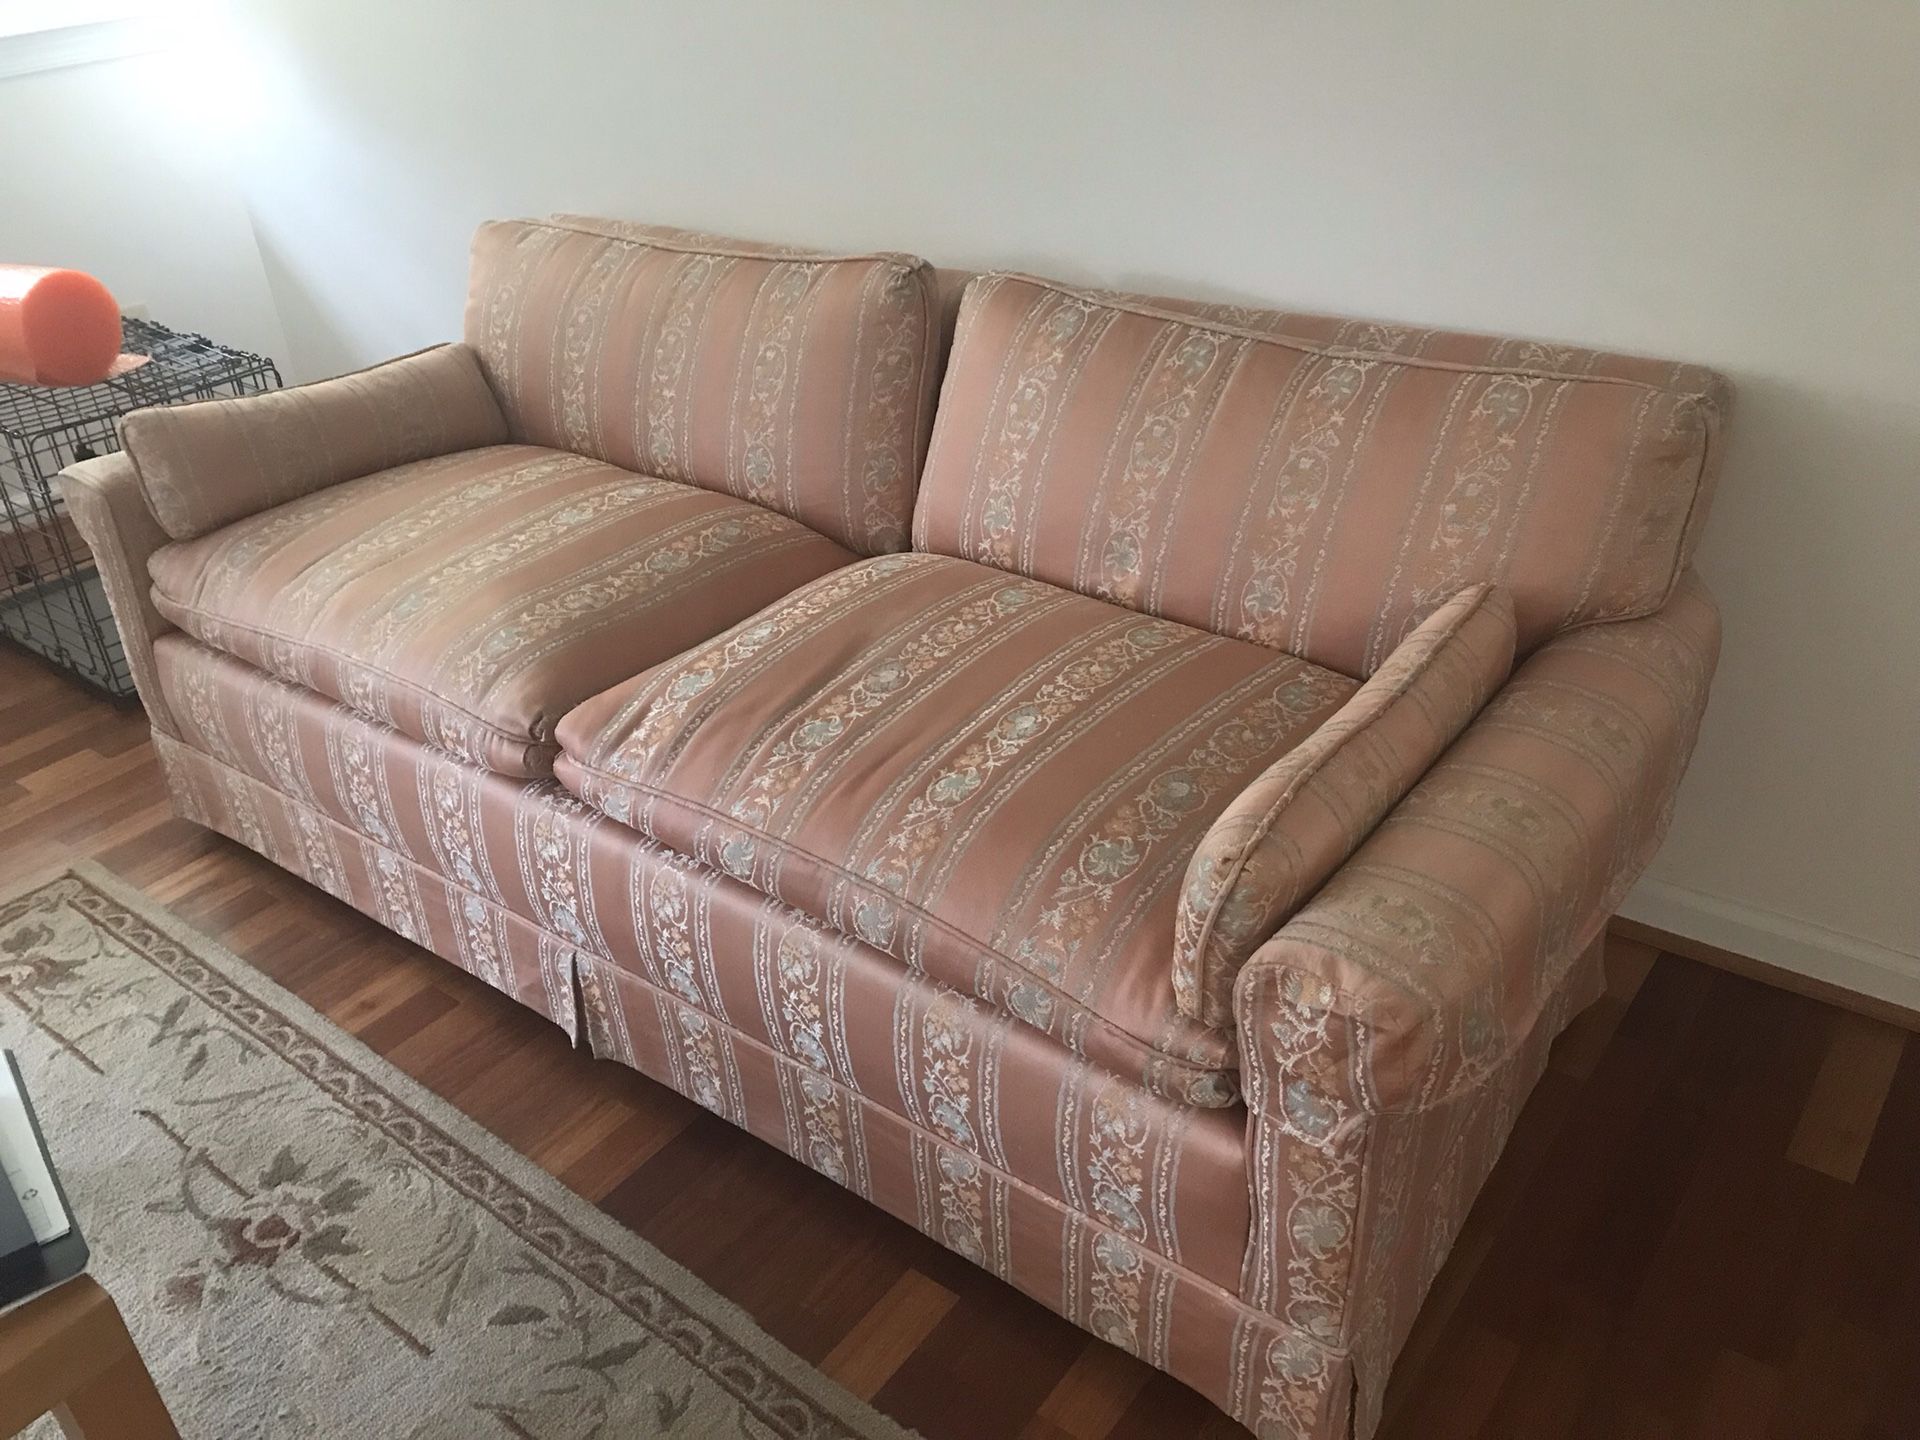 Free antique couch